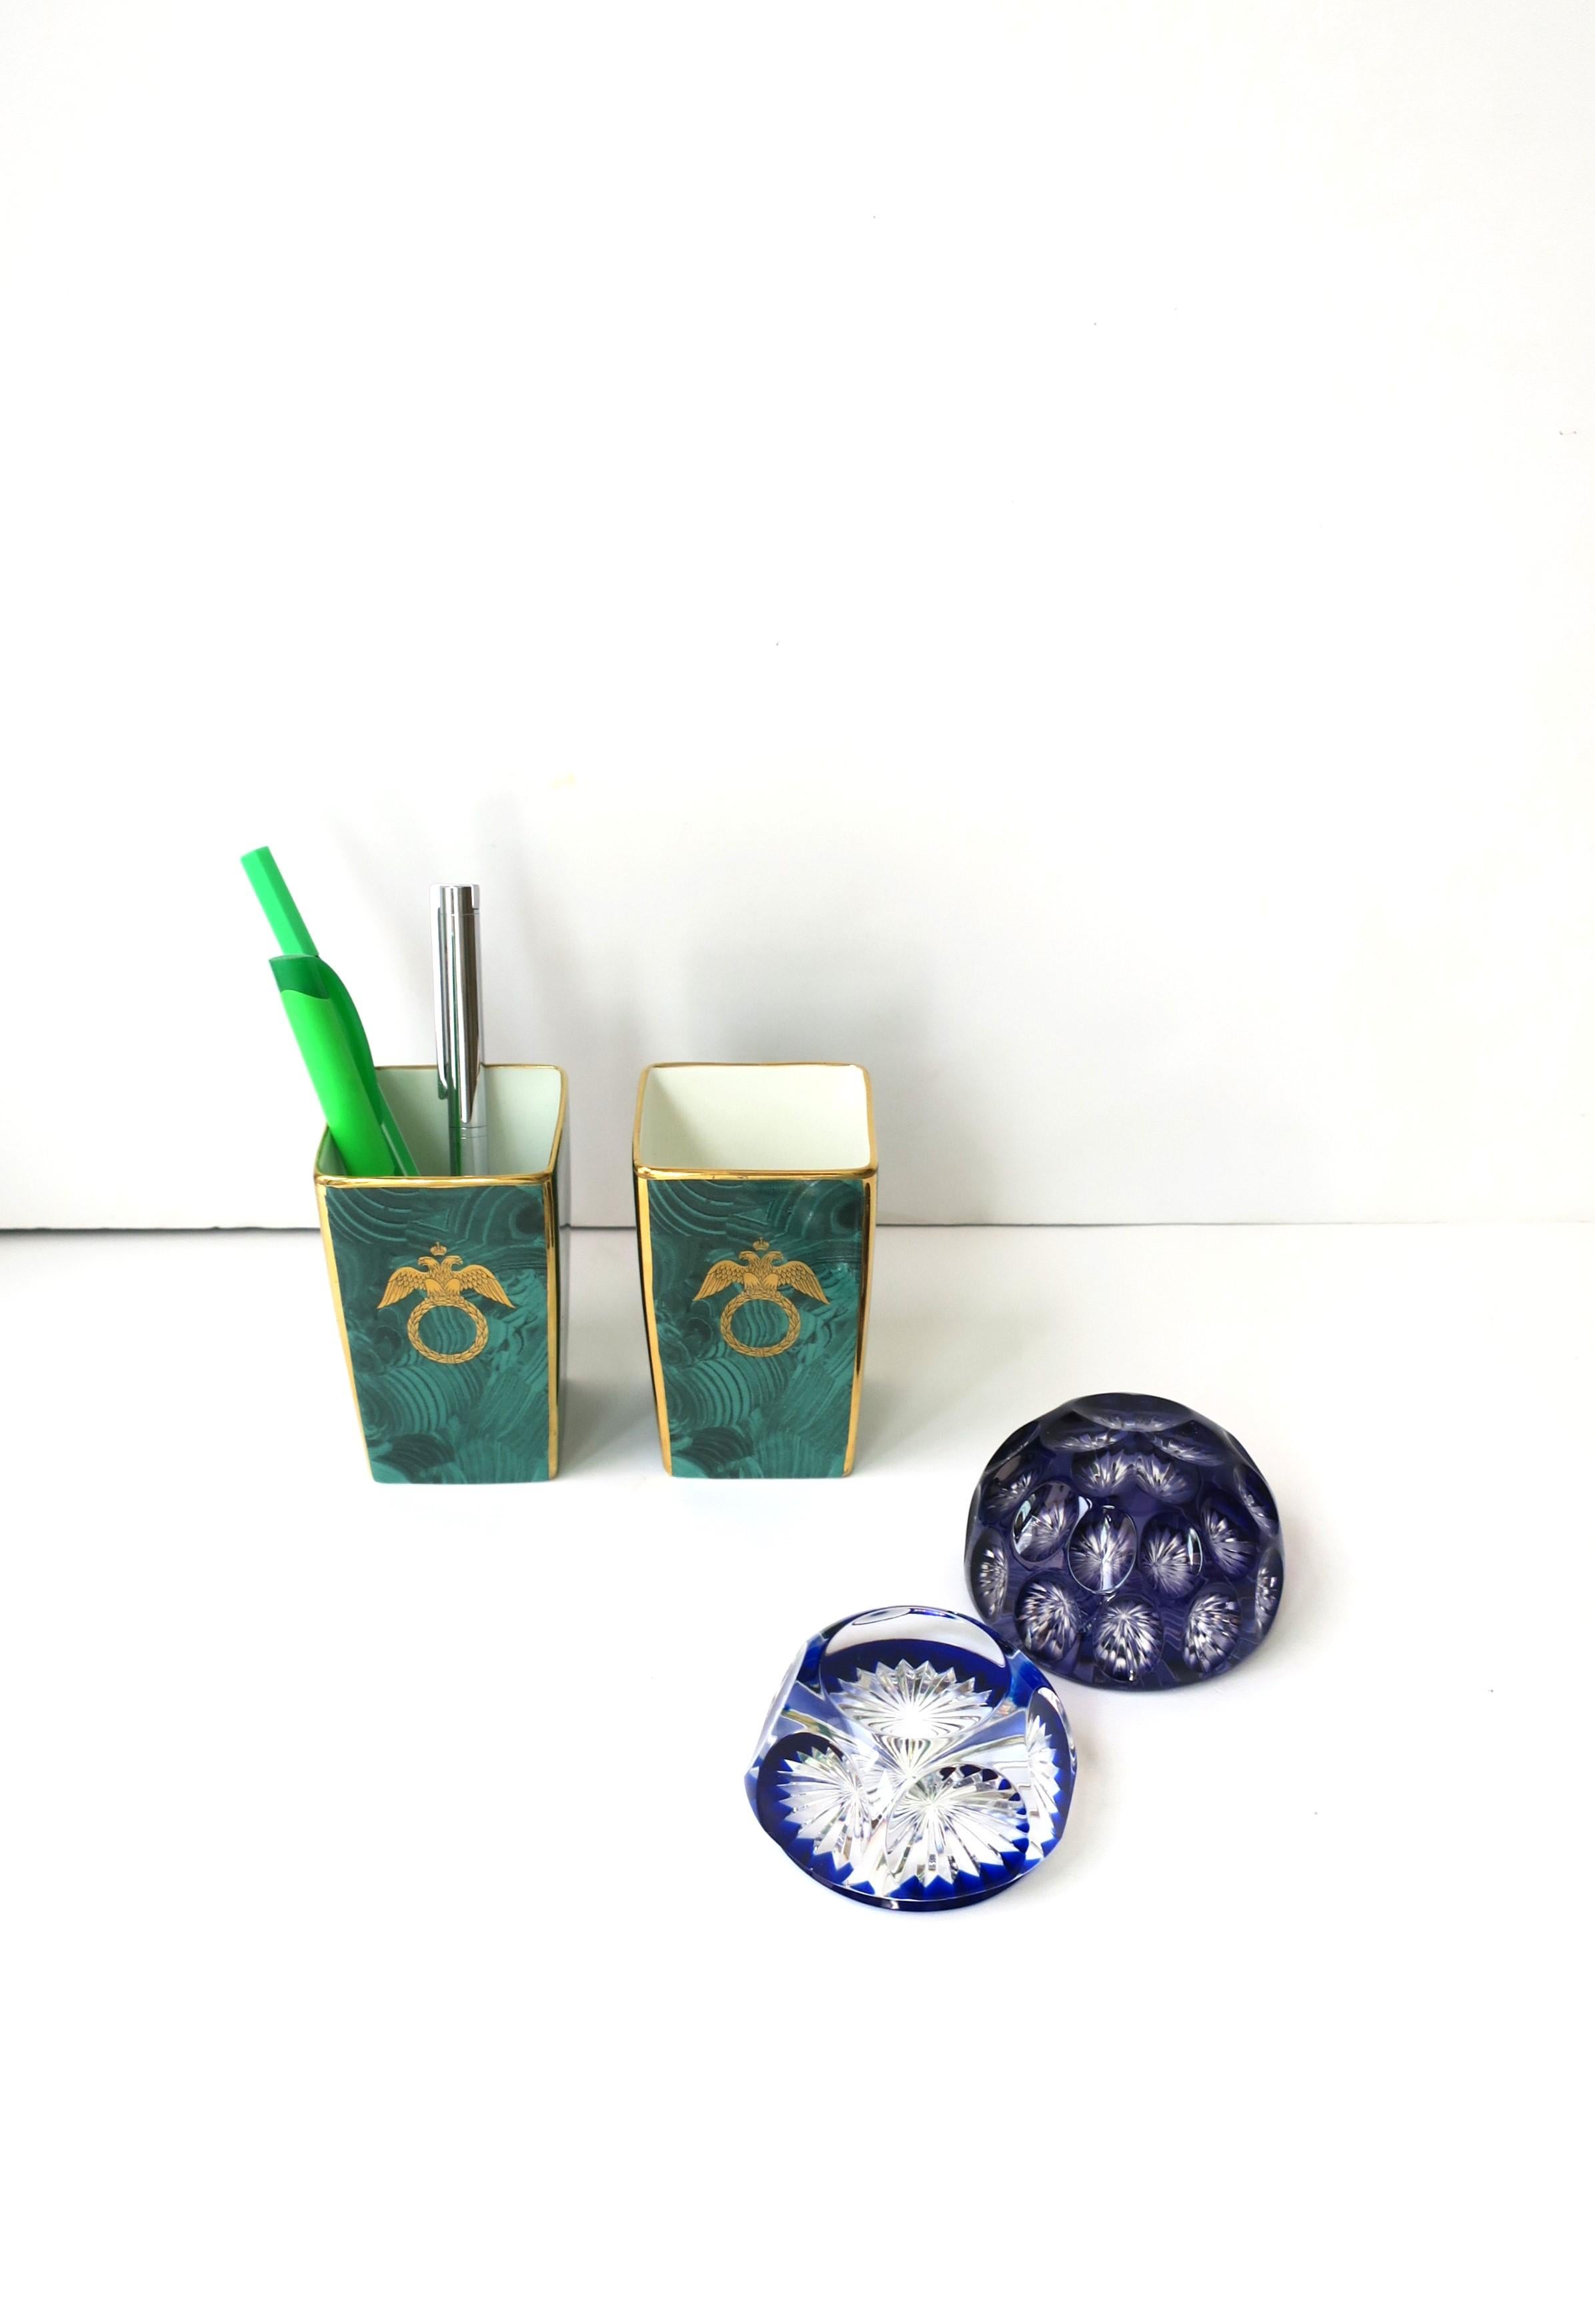 20th Century Malachite and Gold Porcelain Desk Pen or Vanity Holders, or Vases, England, Pair